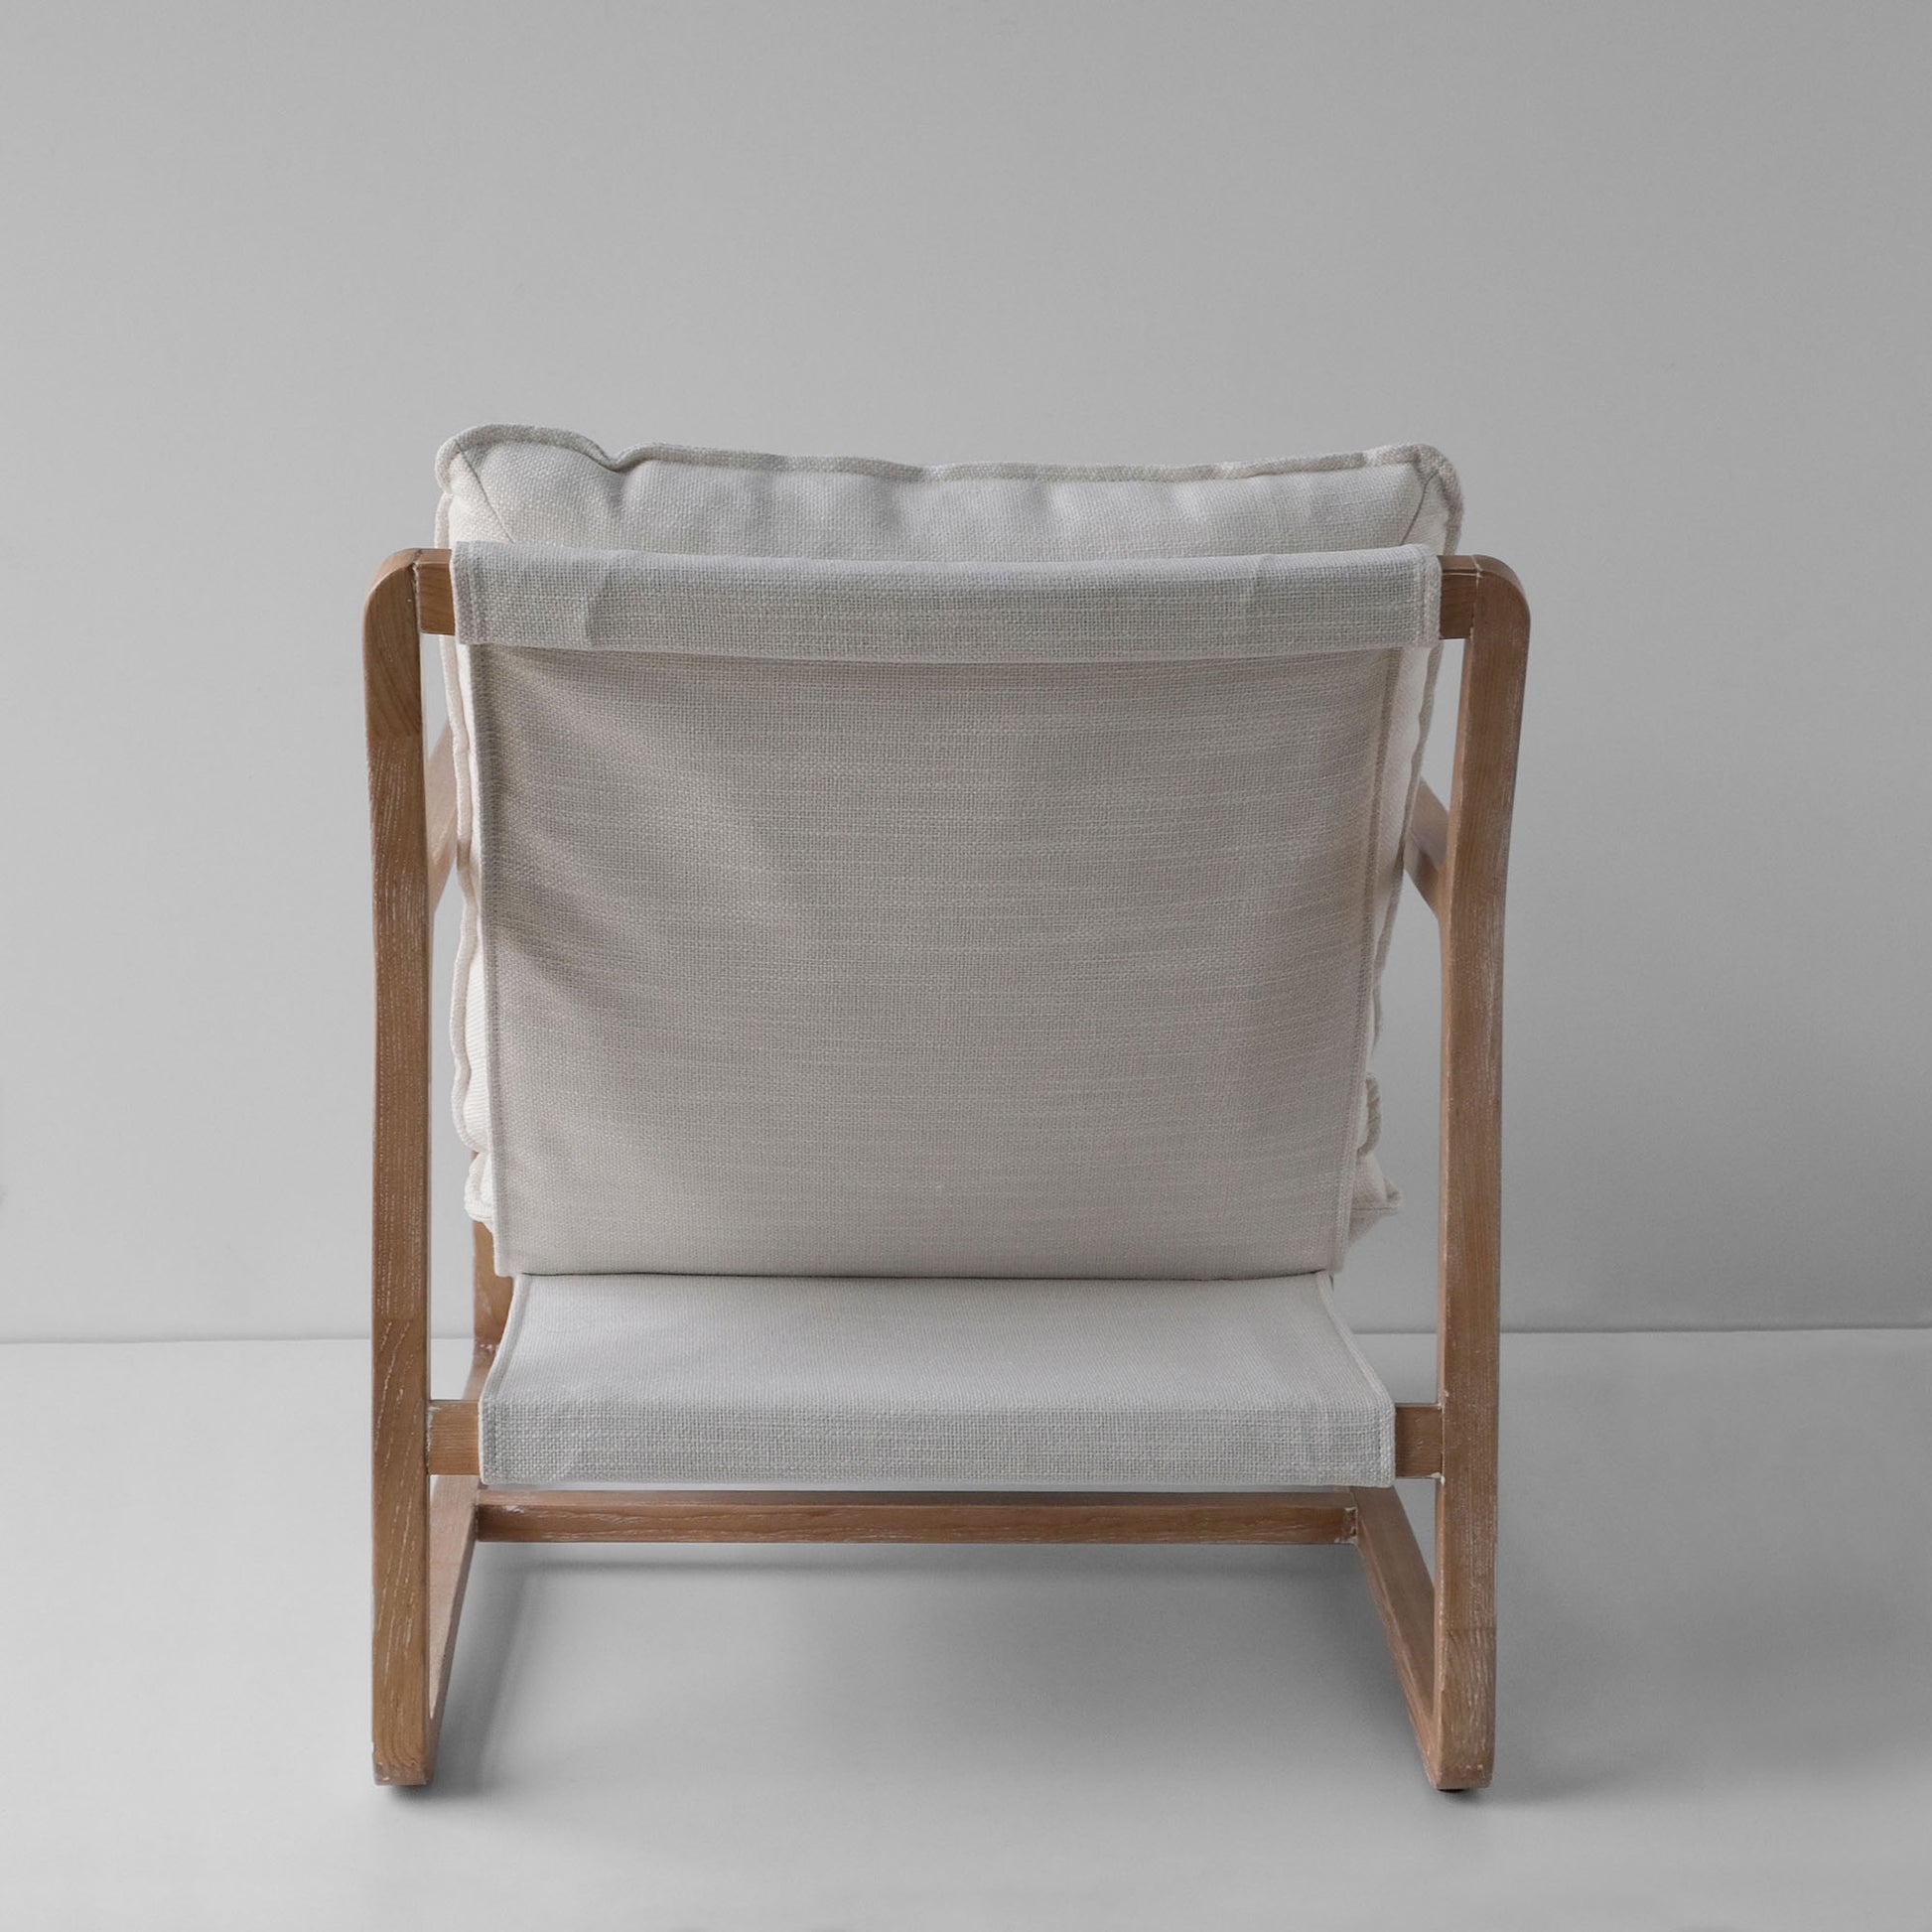 Back view of the white wash linen neutral accent chair